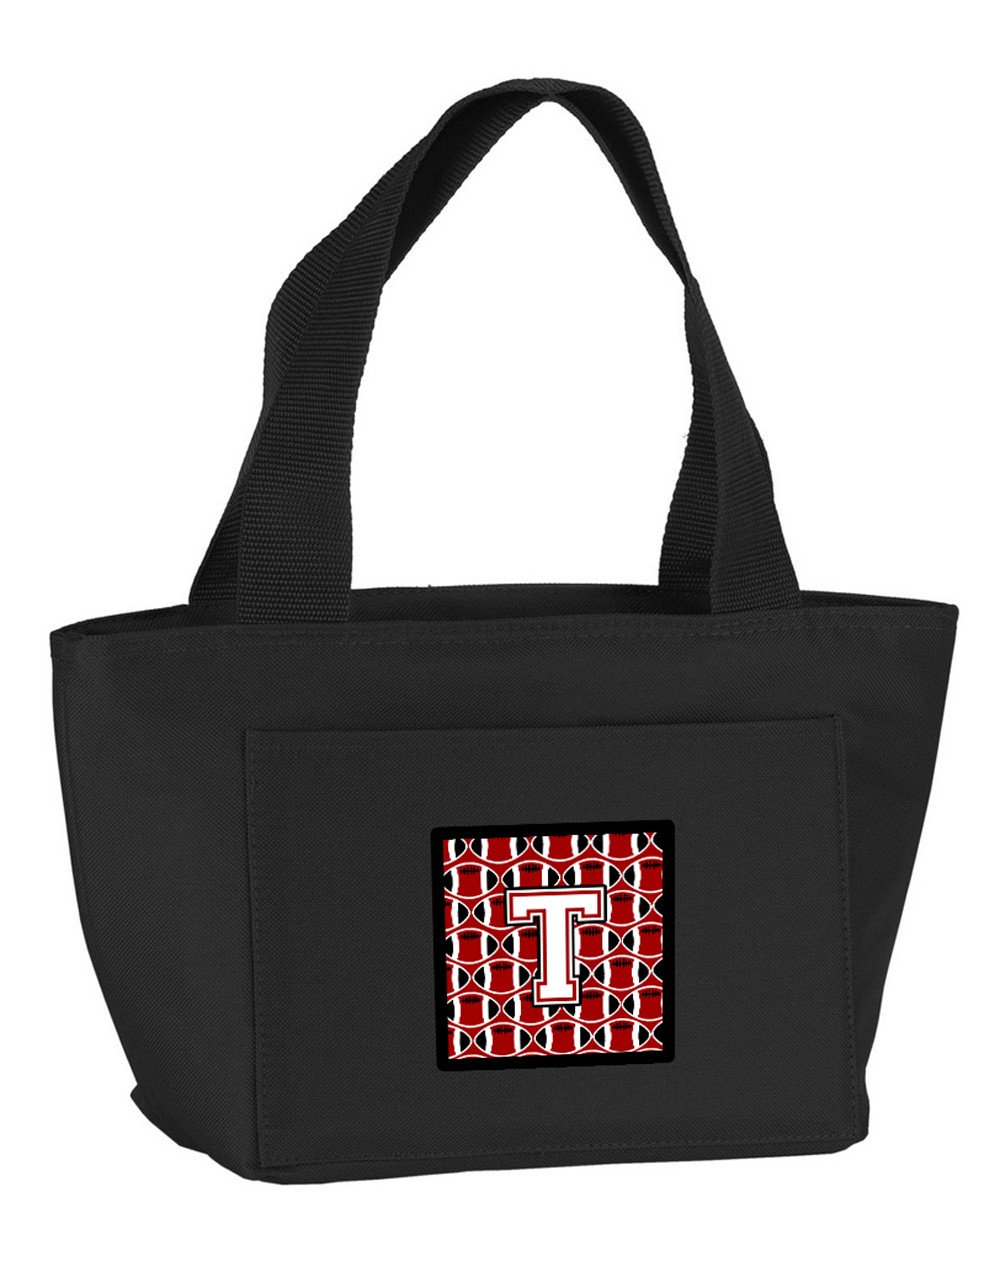 Letter T Football Cardinal and White Lunch Bag CJ1082-TBK-8808 by Caroline's Treasures